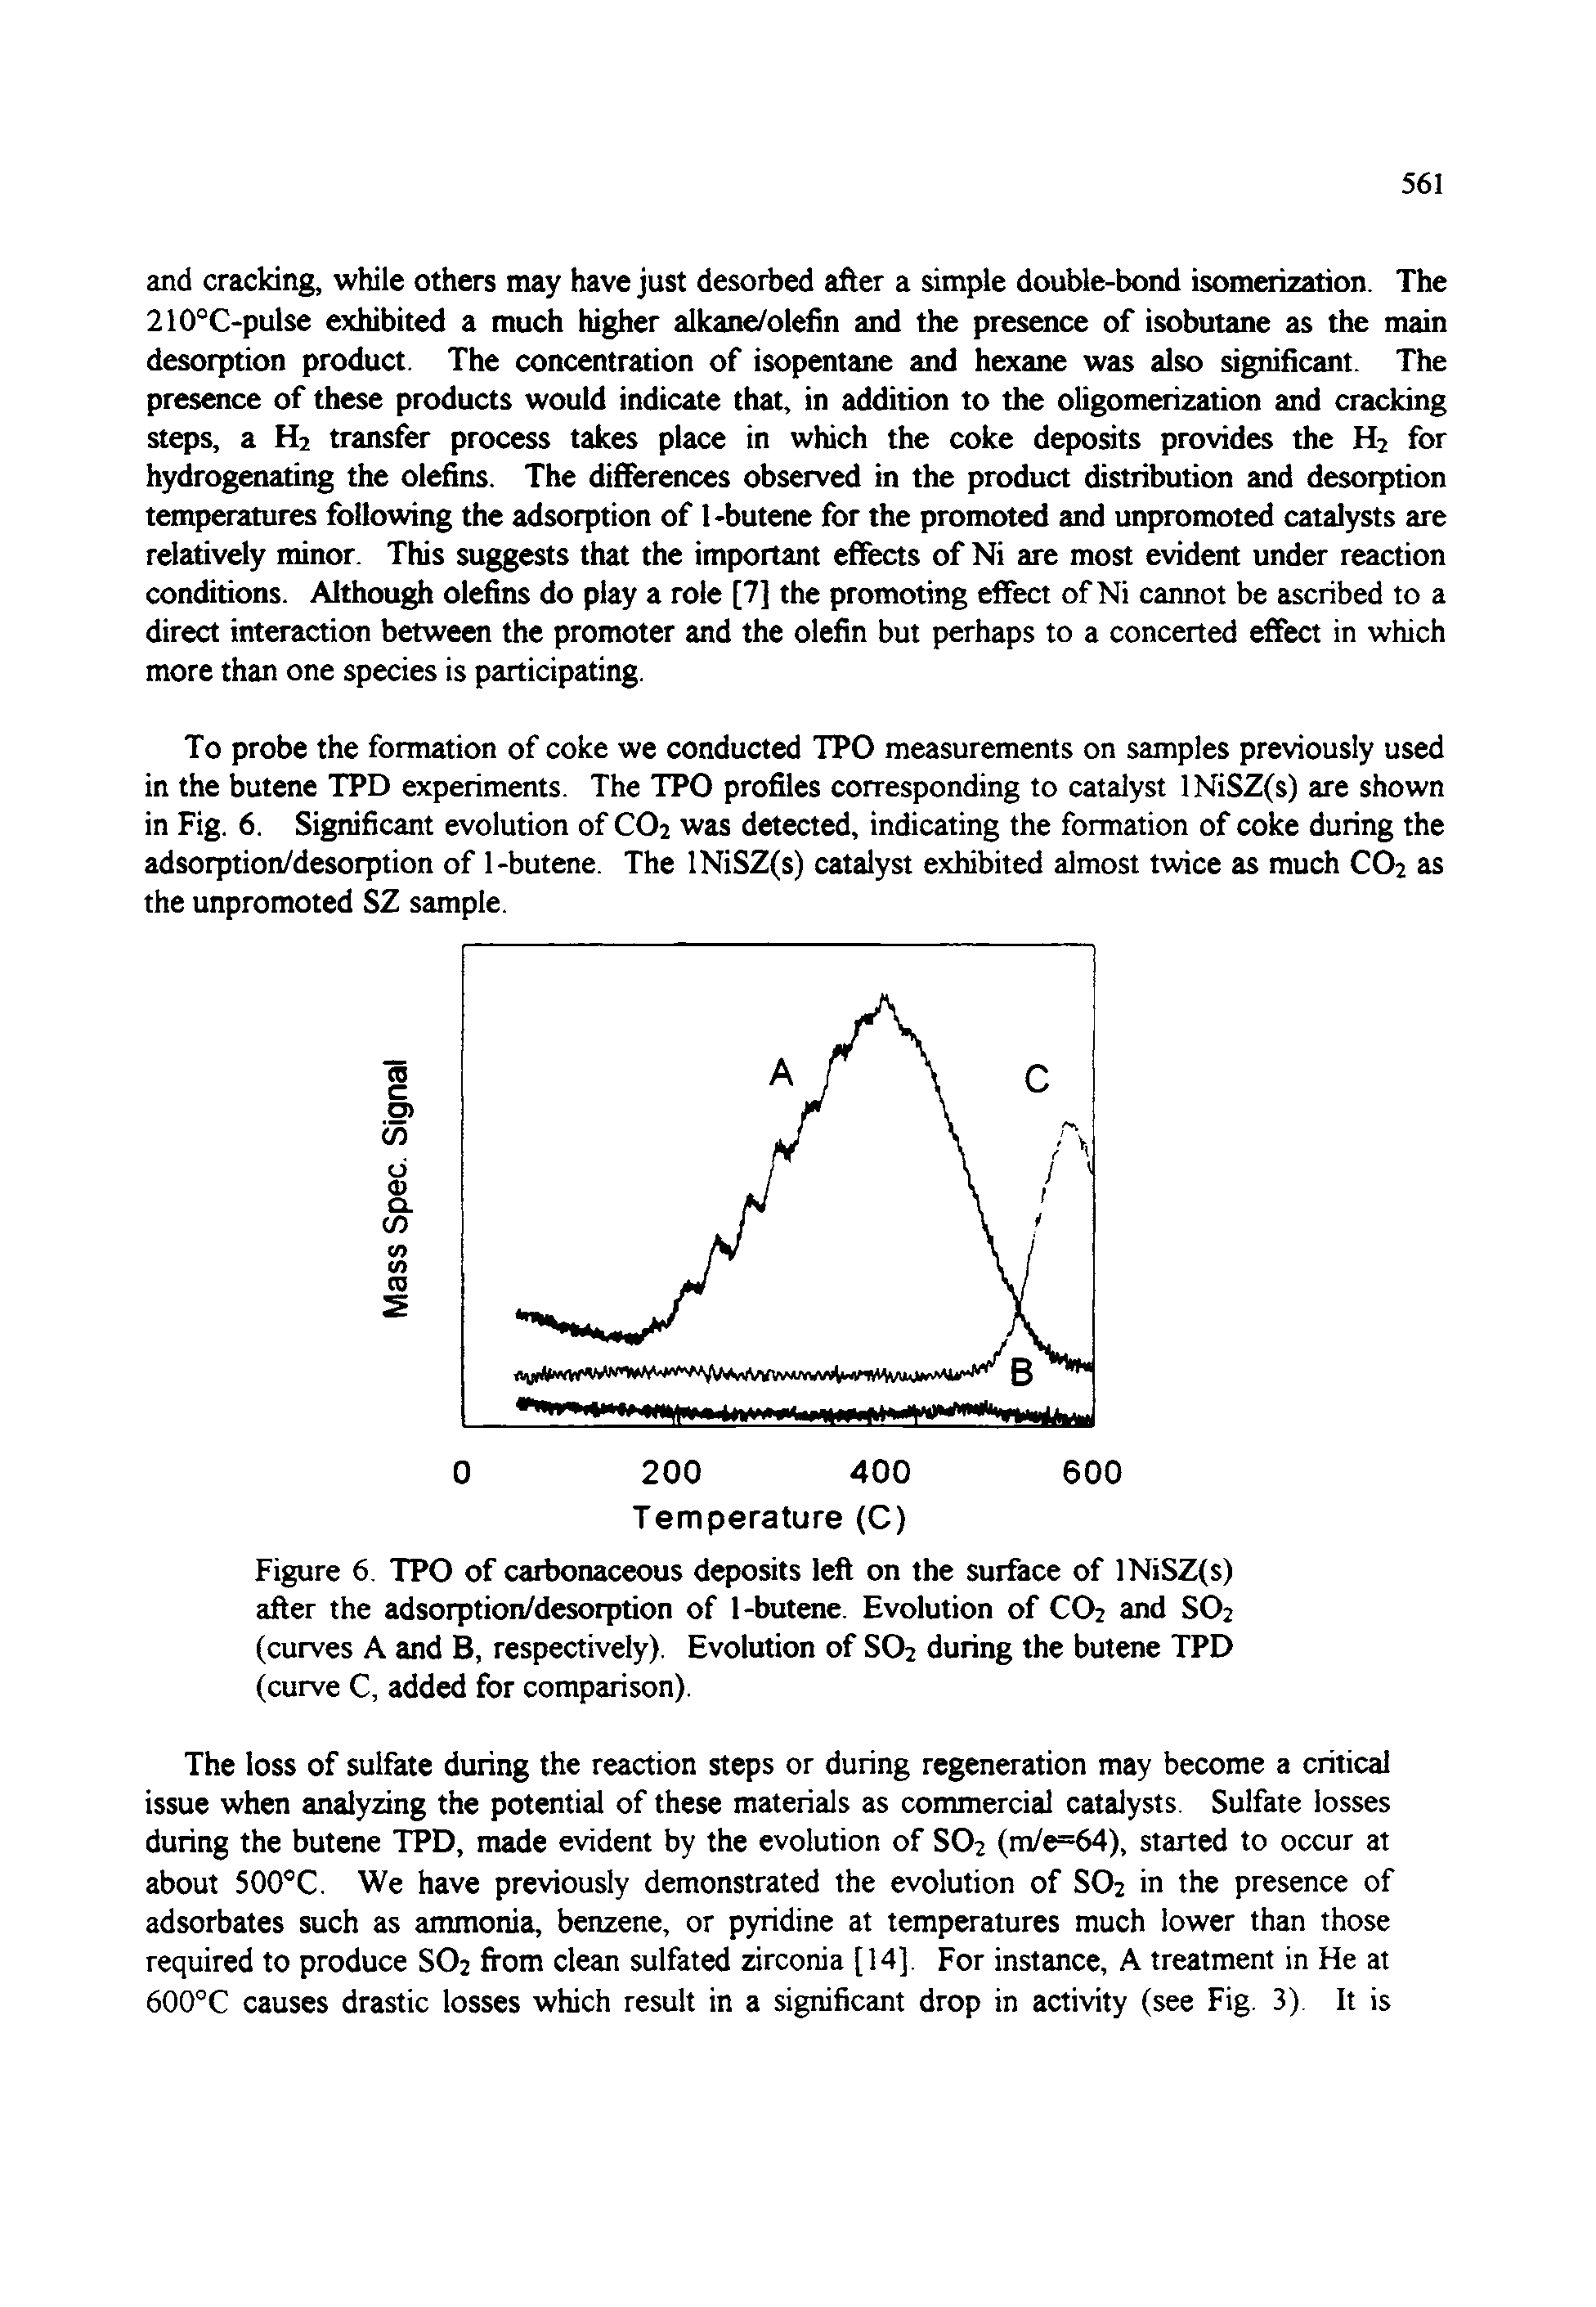 Figure 6 TPO of carbonaceous deposits left on the surface of INiSZ(s) after the adsorption/desorption of 1-butene. Evolution of CO2 and SO2 (curves A and B, respectively). Evolution of SO2 during the butene TPD (curve C, added for comparison).